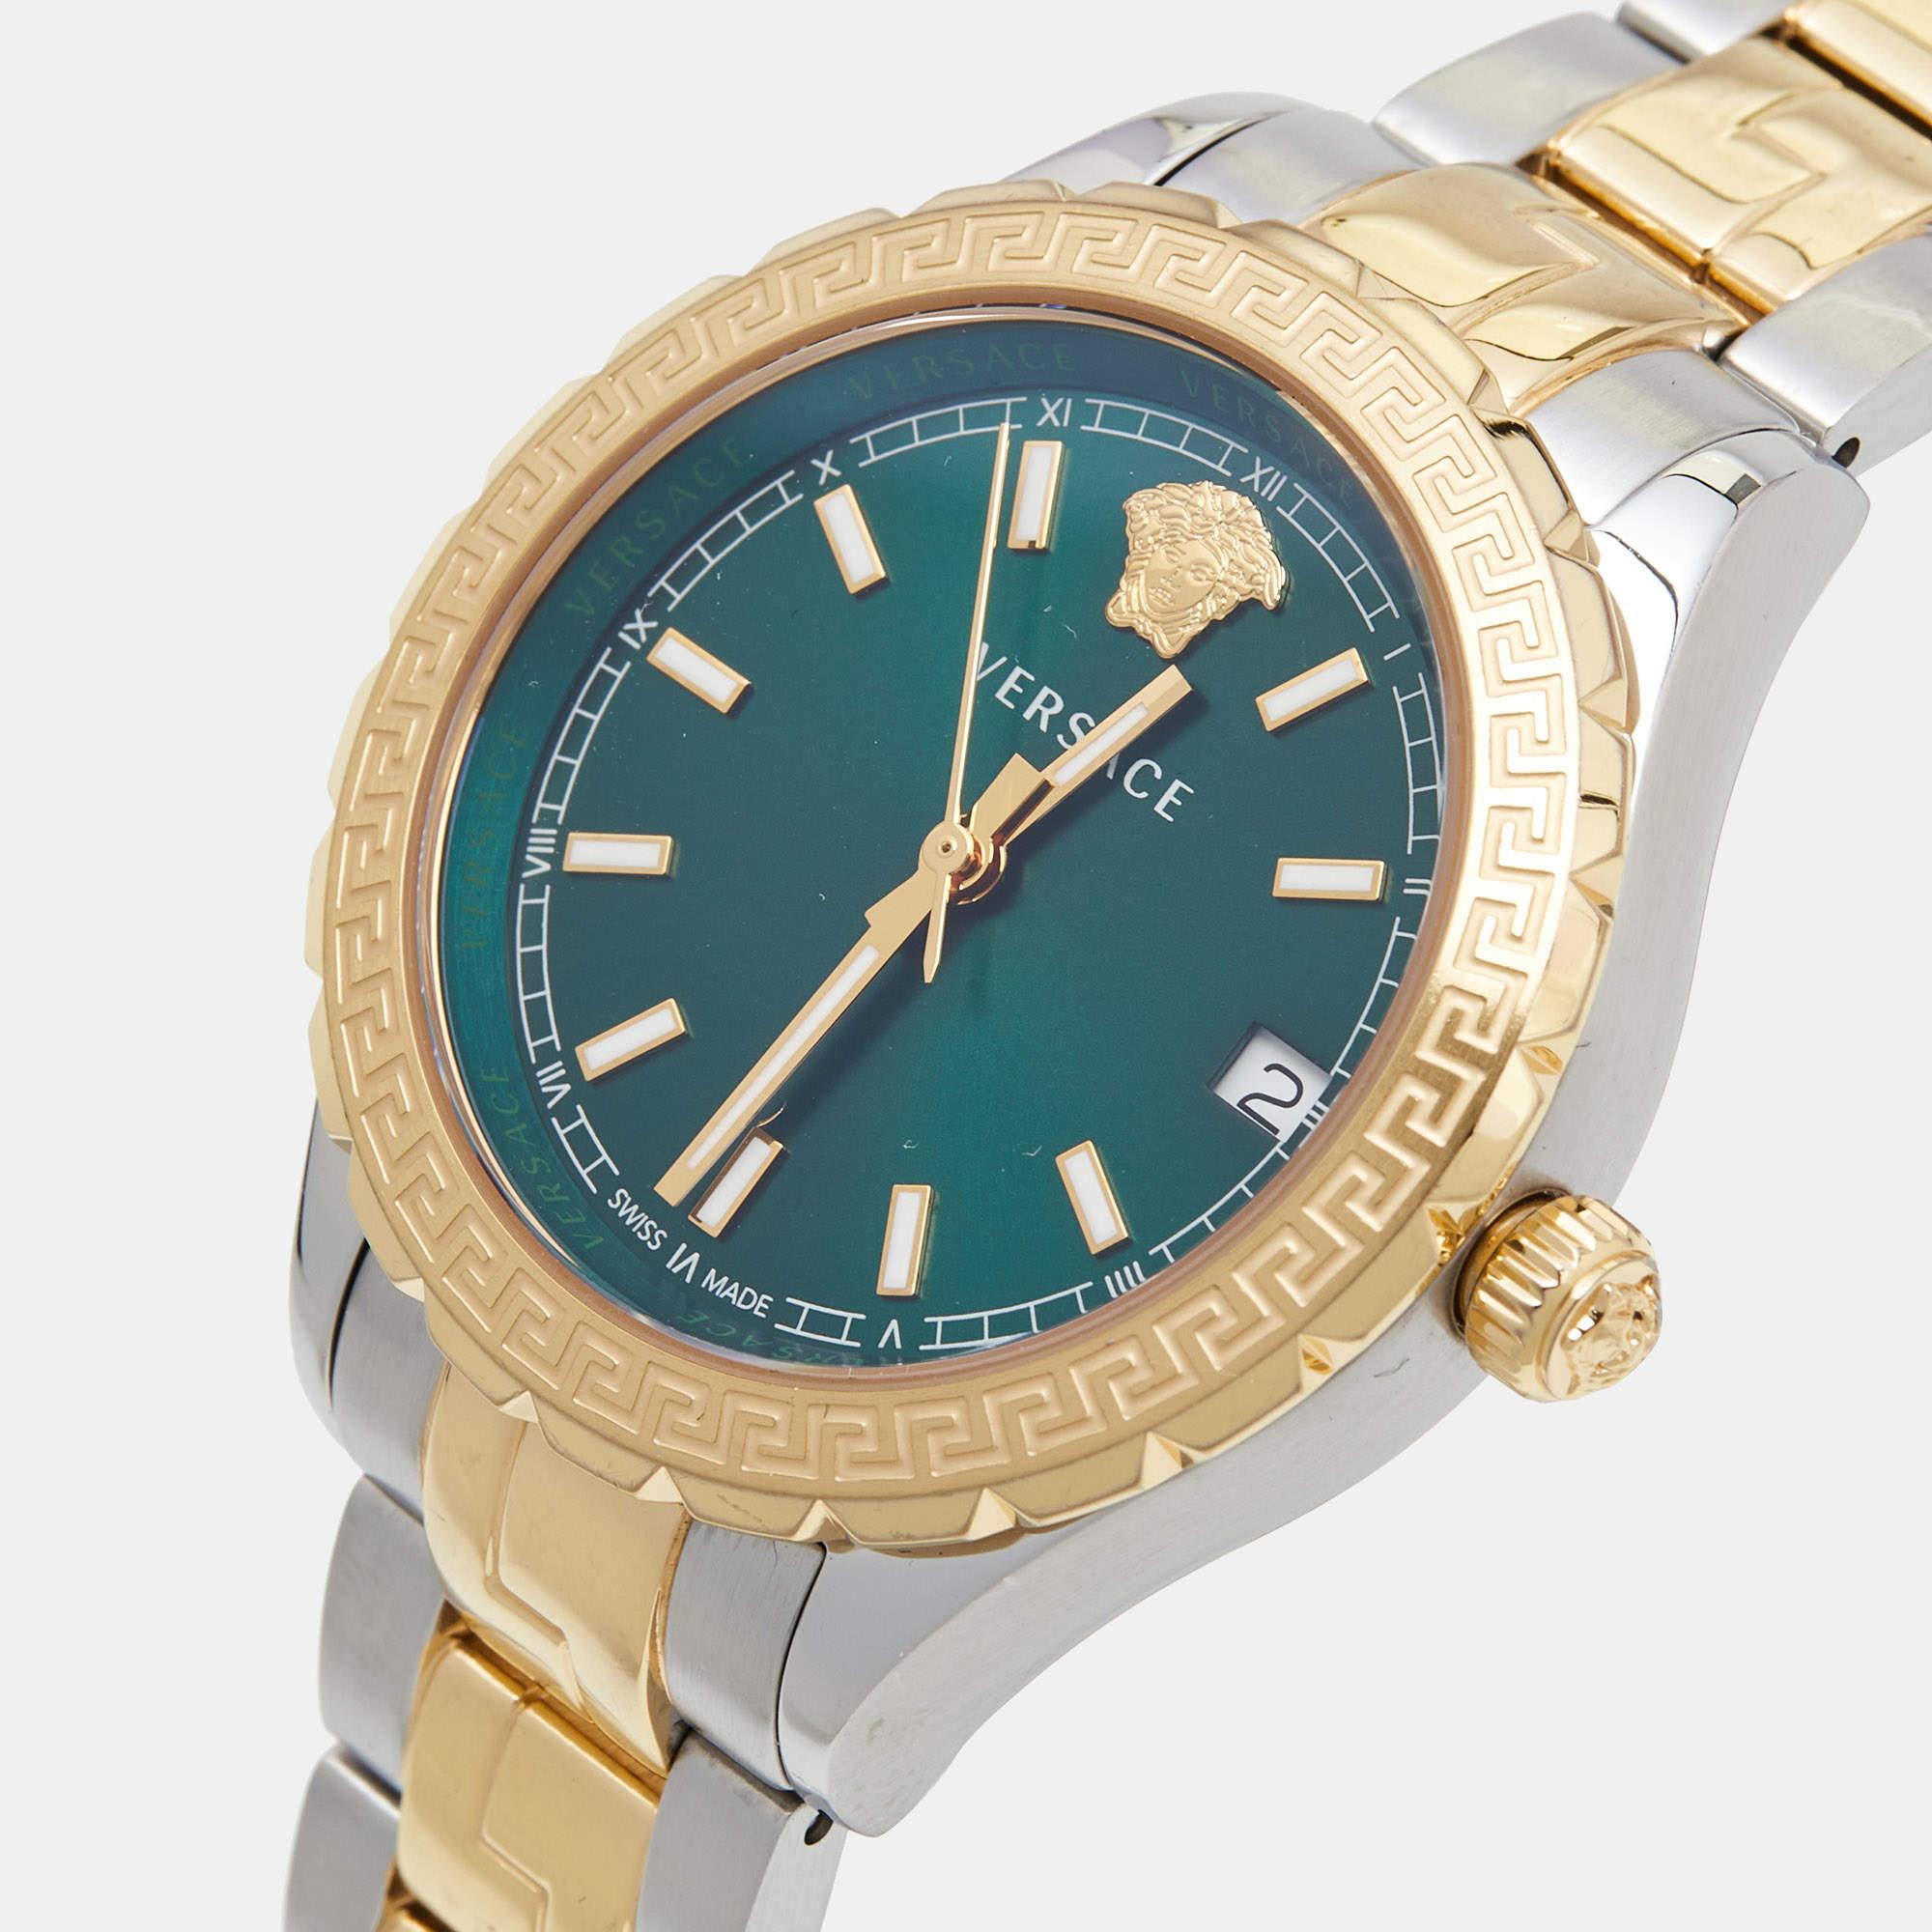 Versace Green Two-Tone Stainless Steel Hellenyium V12050016 Women's Wristwatch 3 In Good Condition For Sale In Dubai, Al Qouz 2